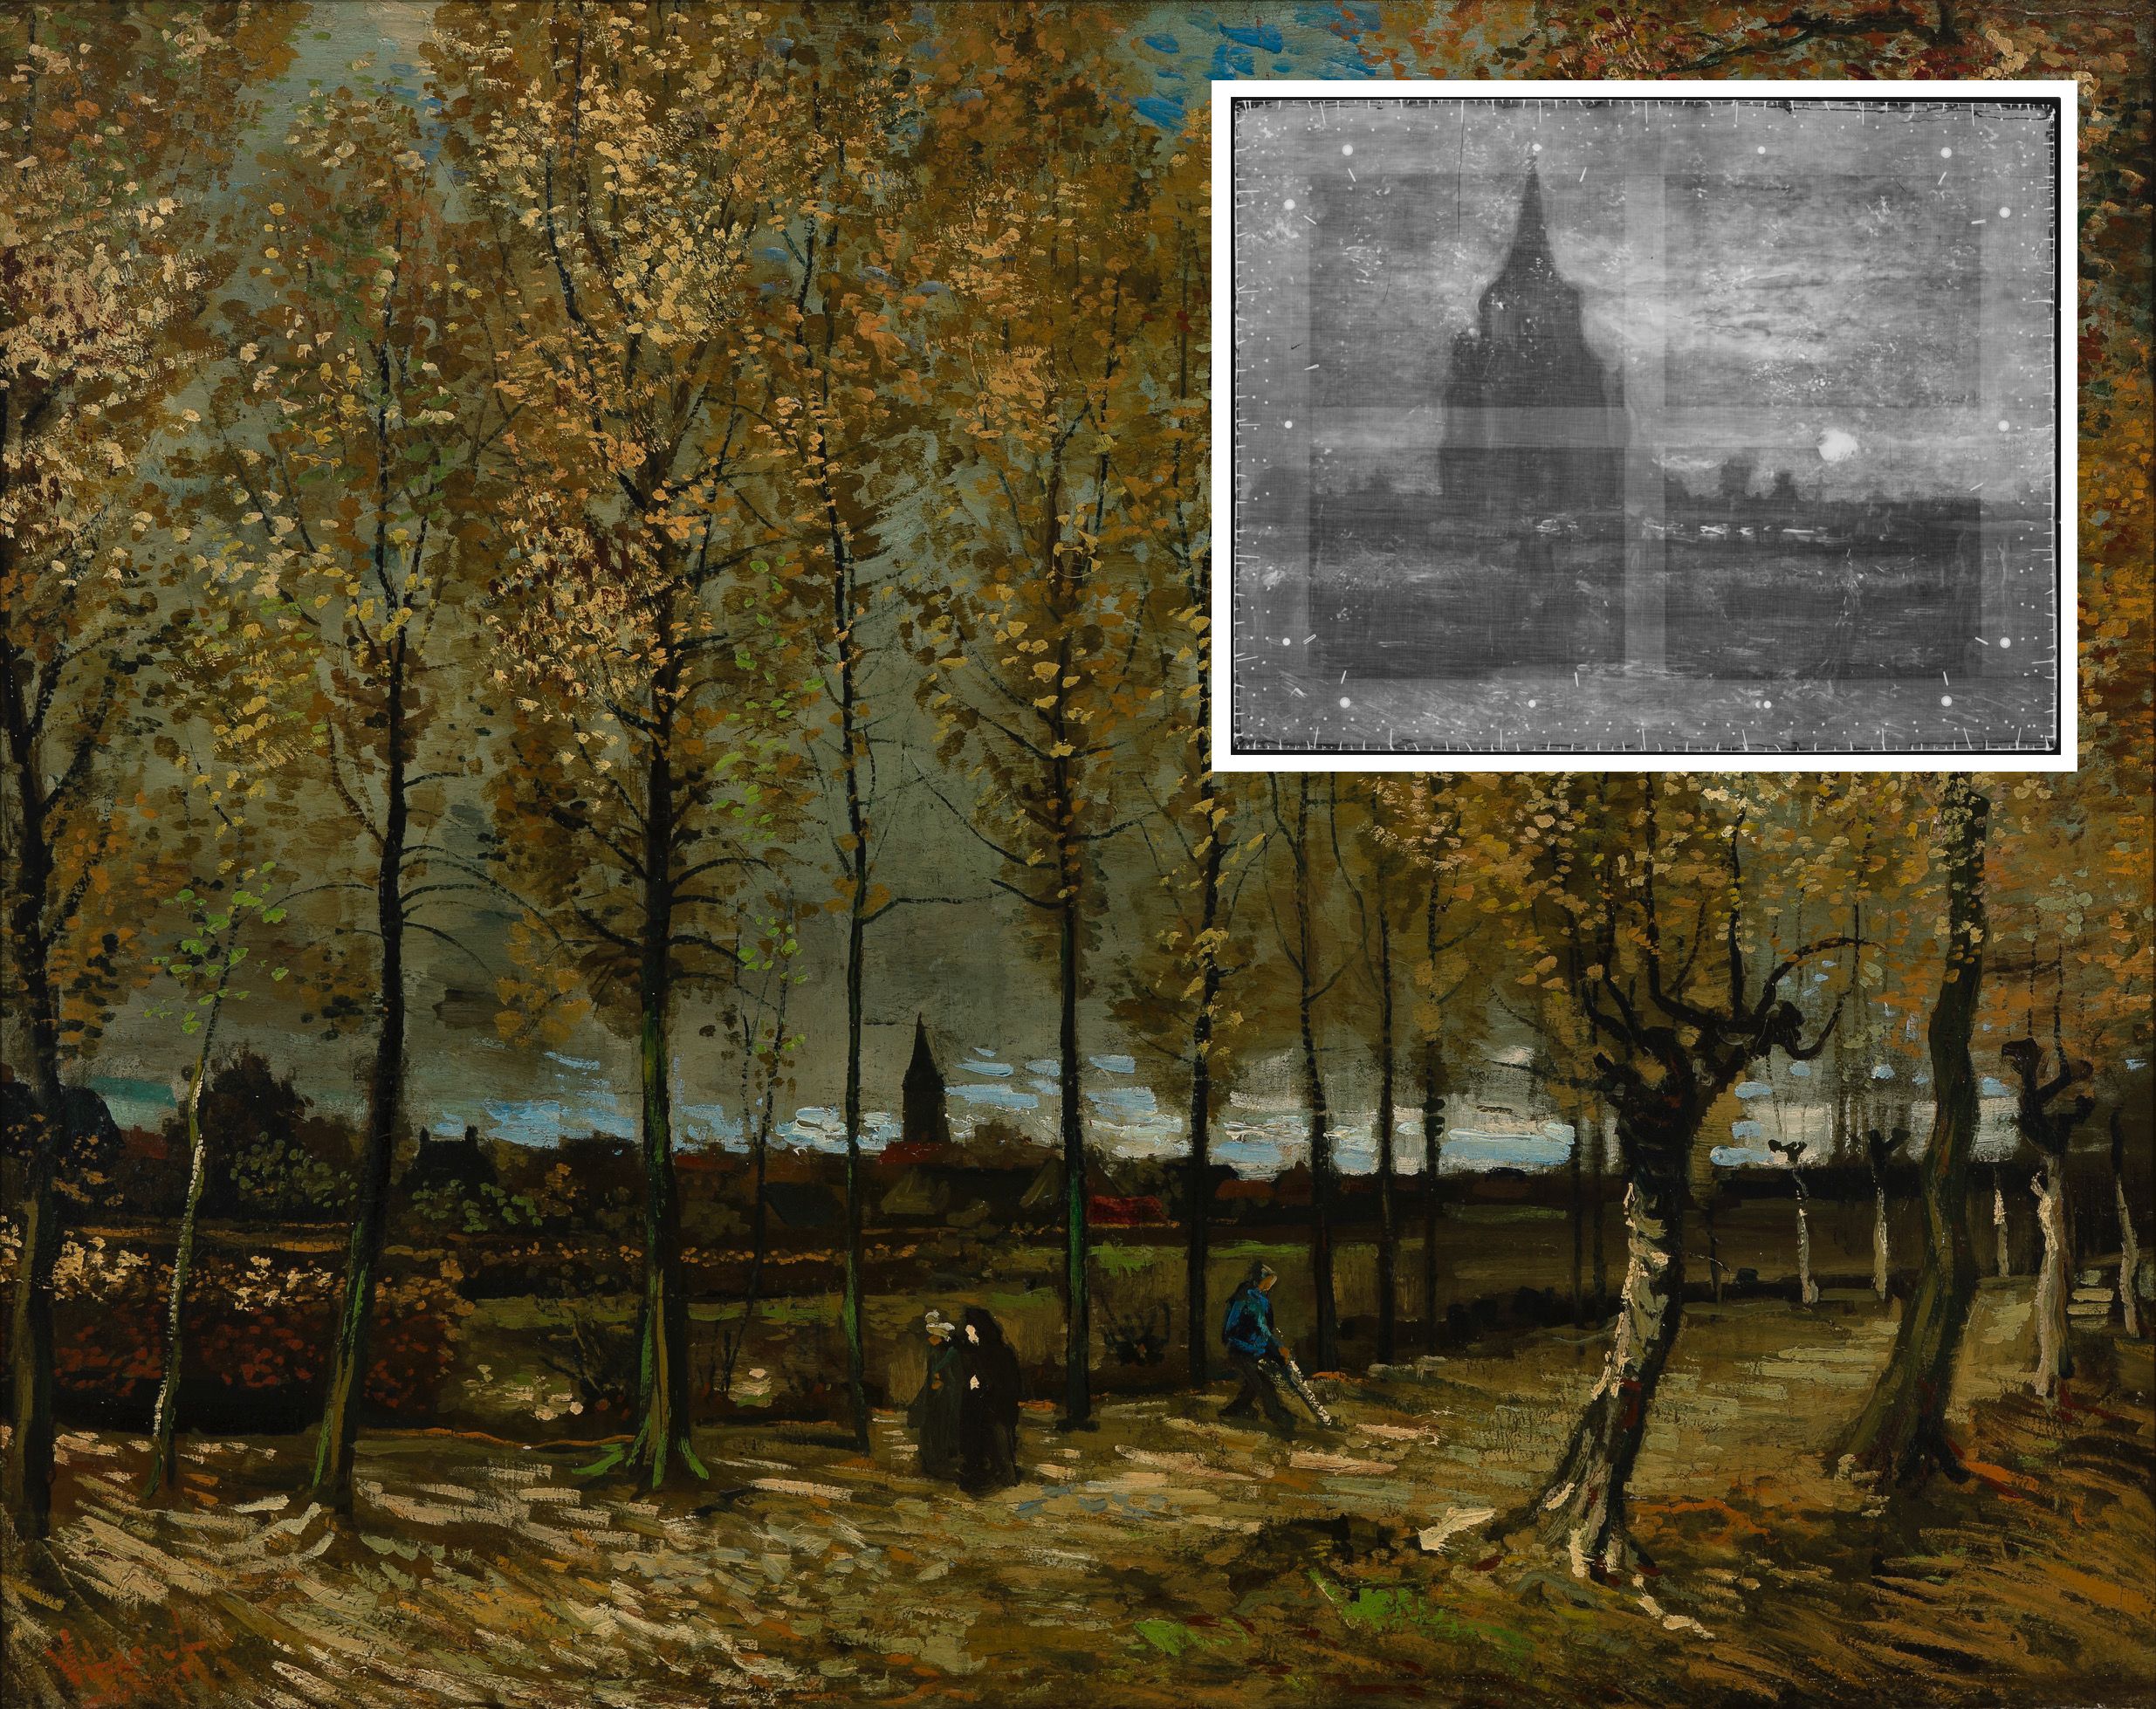 Culture Re-View: Van Gogh's 170th birthday, how his reputation grew